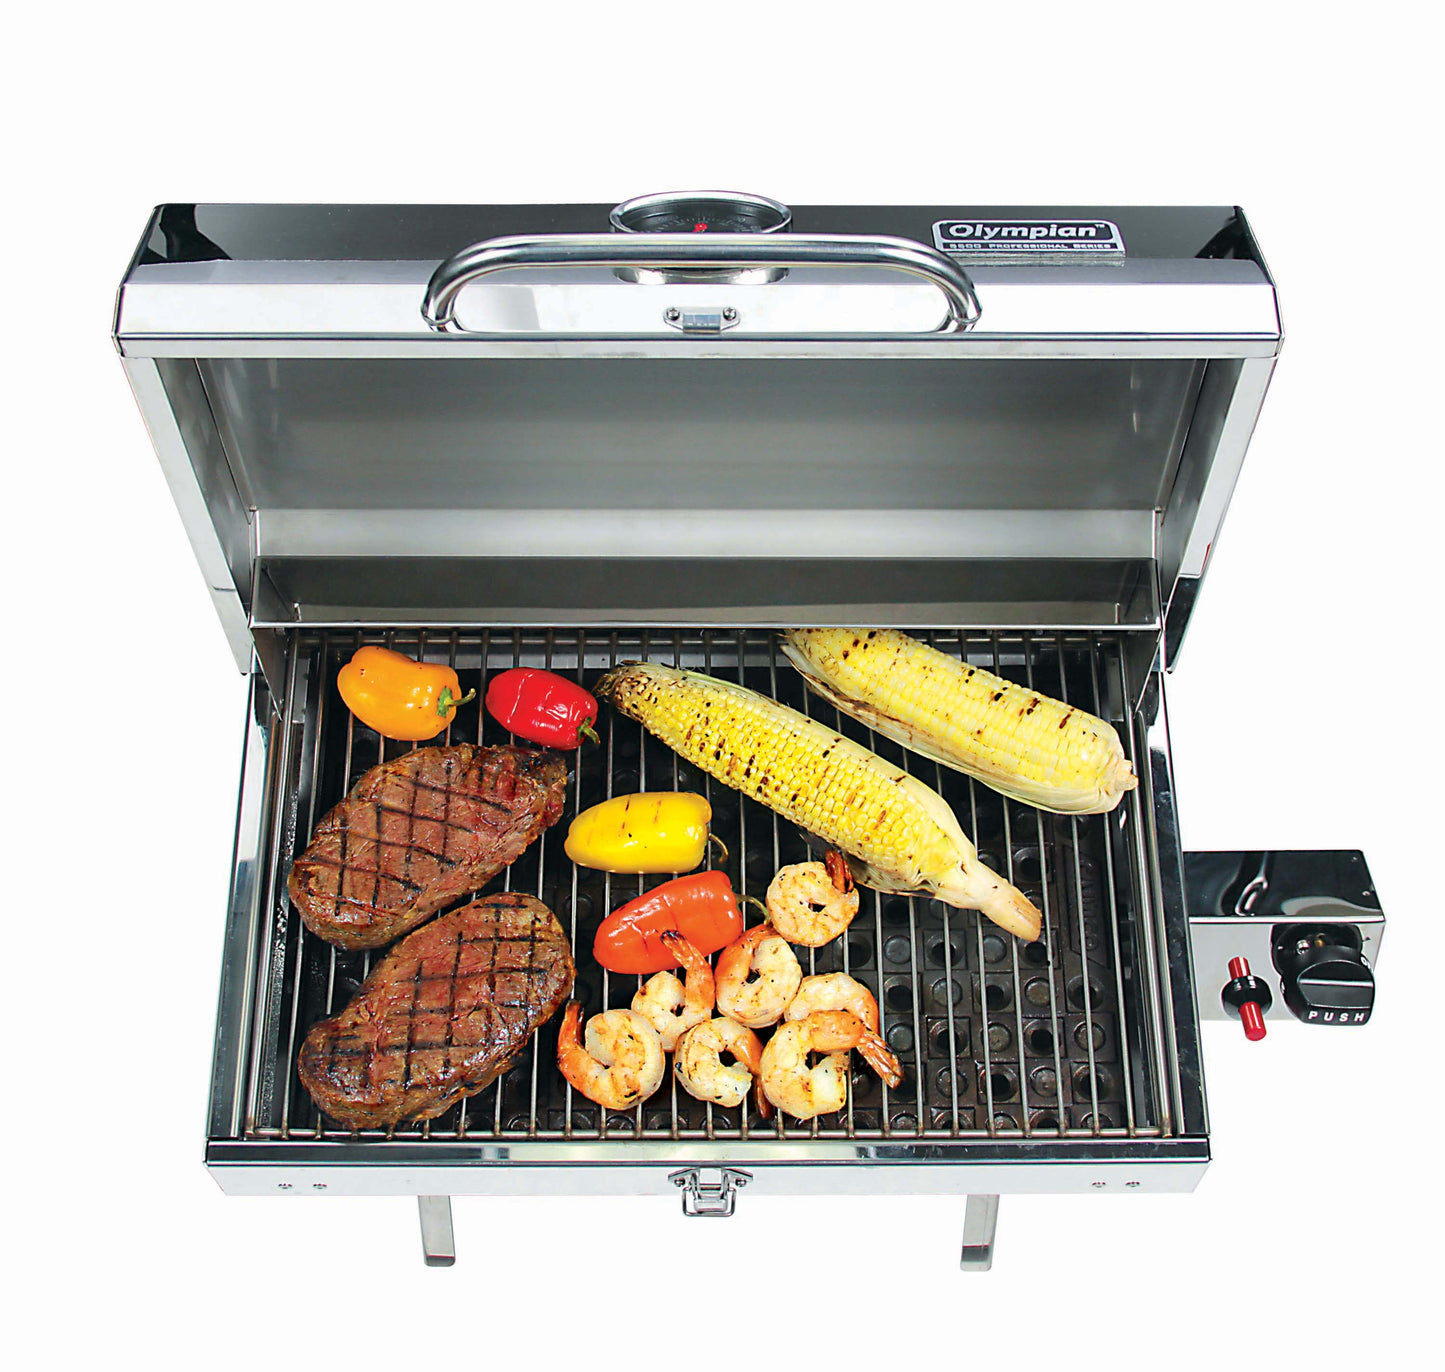 Olympian 5500 Stainless Steel Portable RV/Marine Grill - Clearance